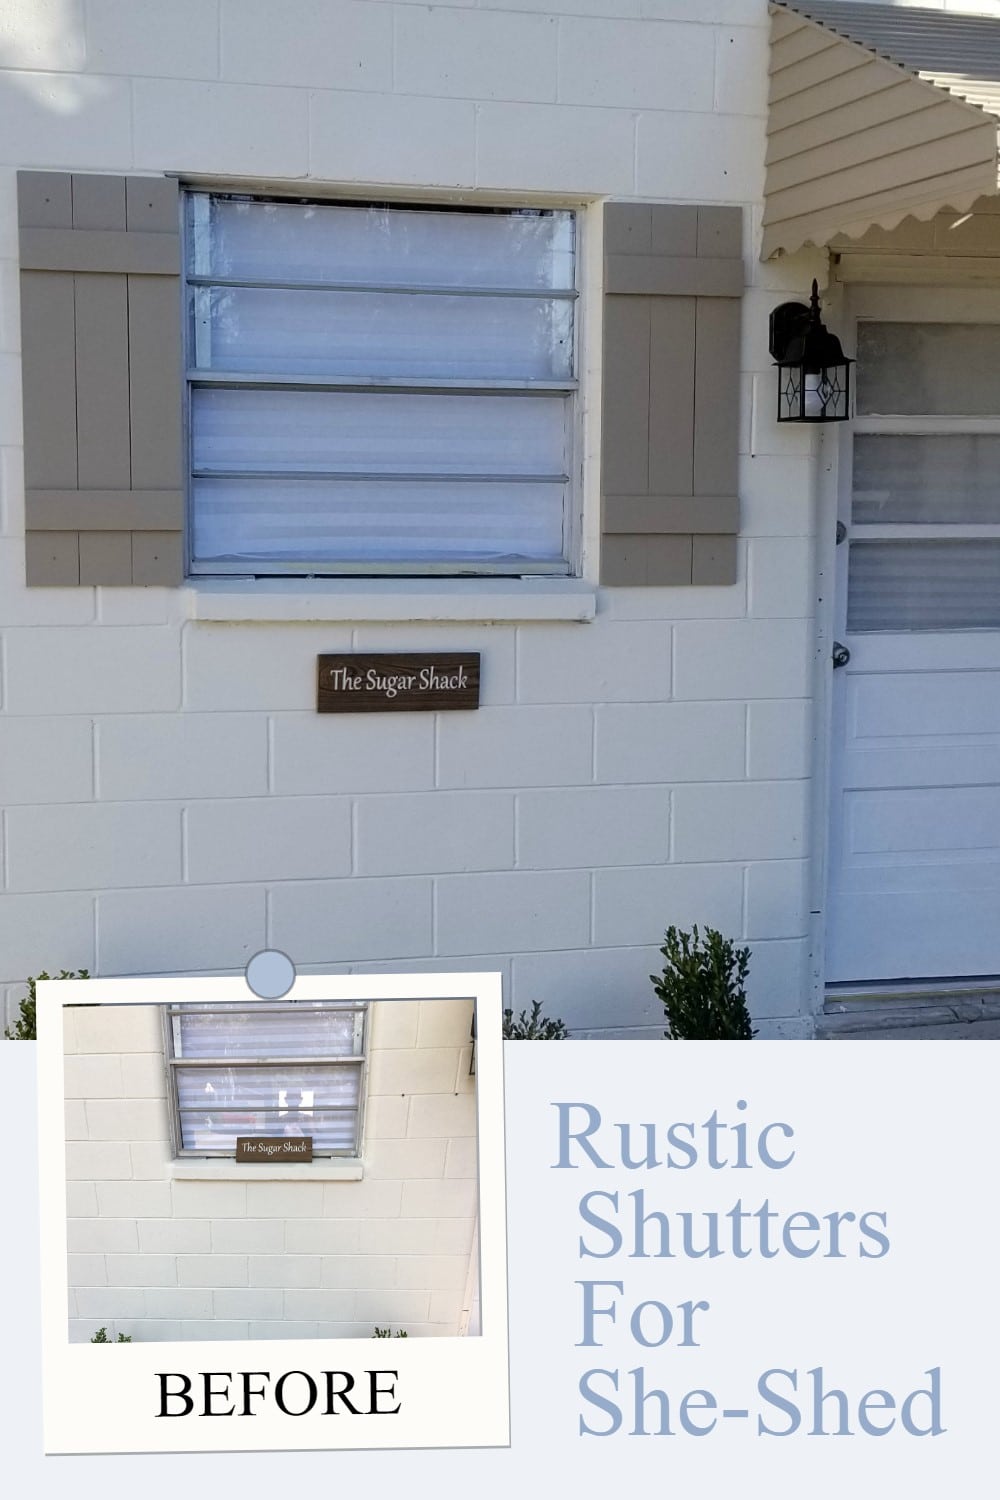 How to assemble and install faux farmhouse shutters on your outbuilding, she- shed or home. Great step by step directions on building and installing shutters in brick or stone. #myrepurposedlife #shutters #farmhouse #diy #sheshed #outbuilding via @repurposedlife